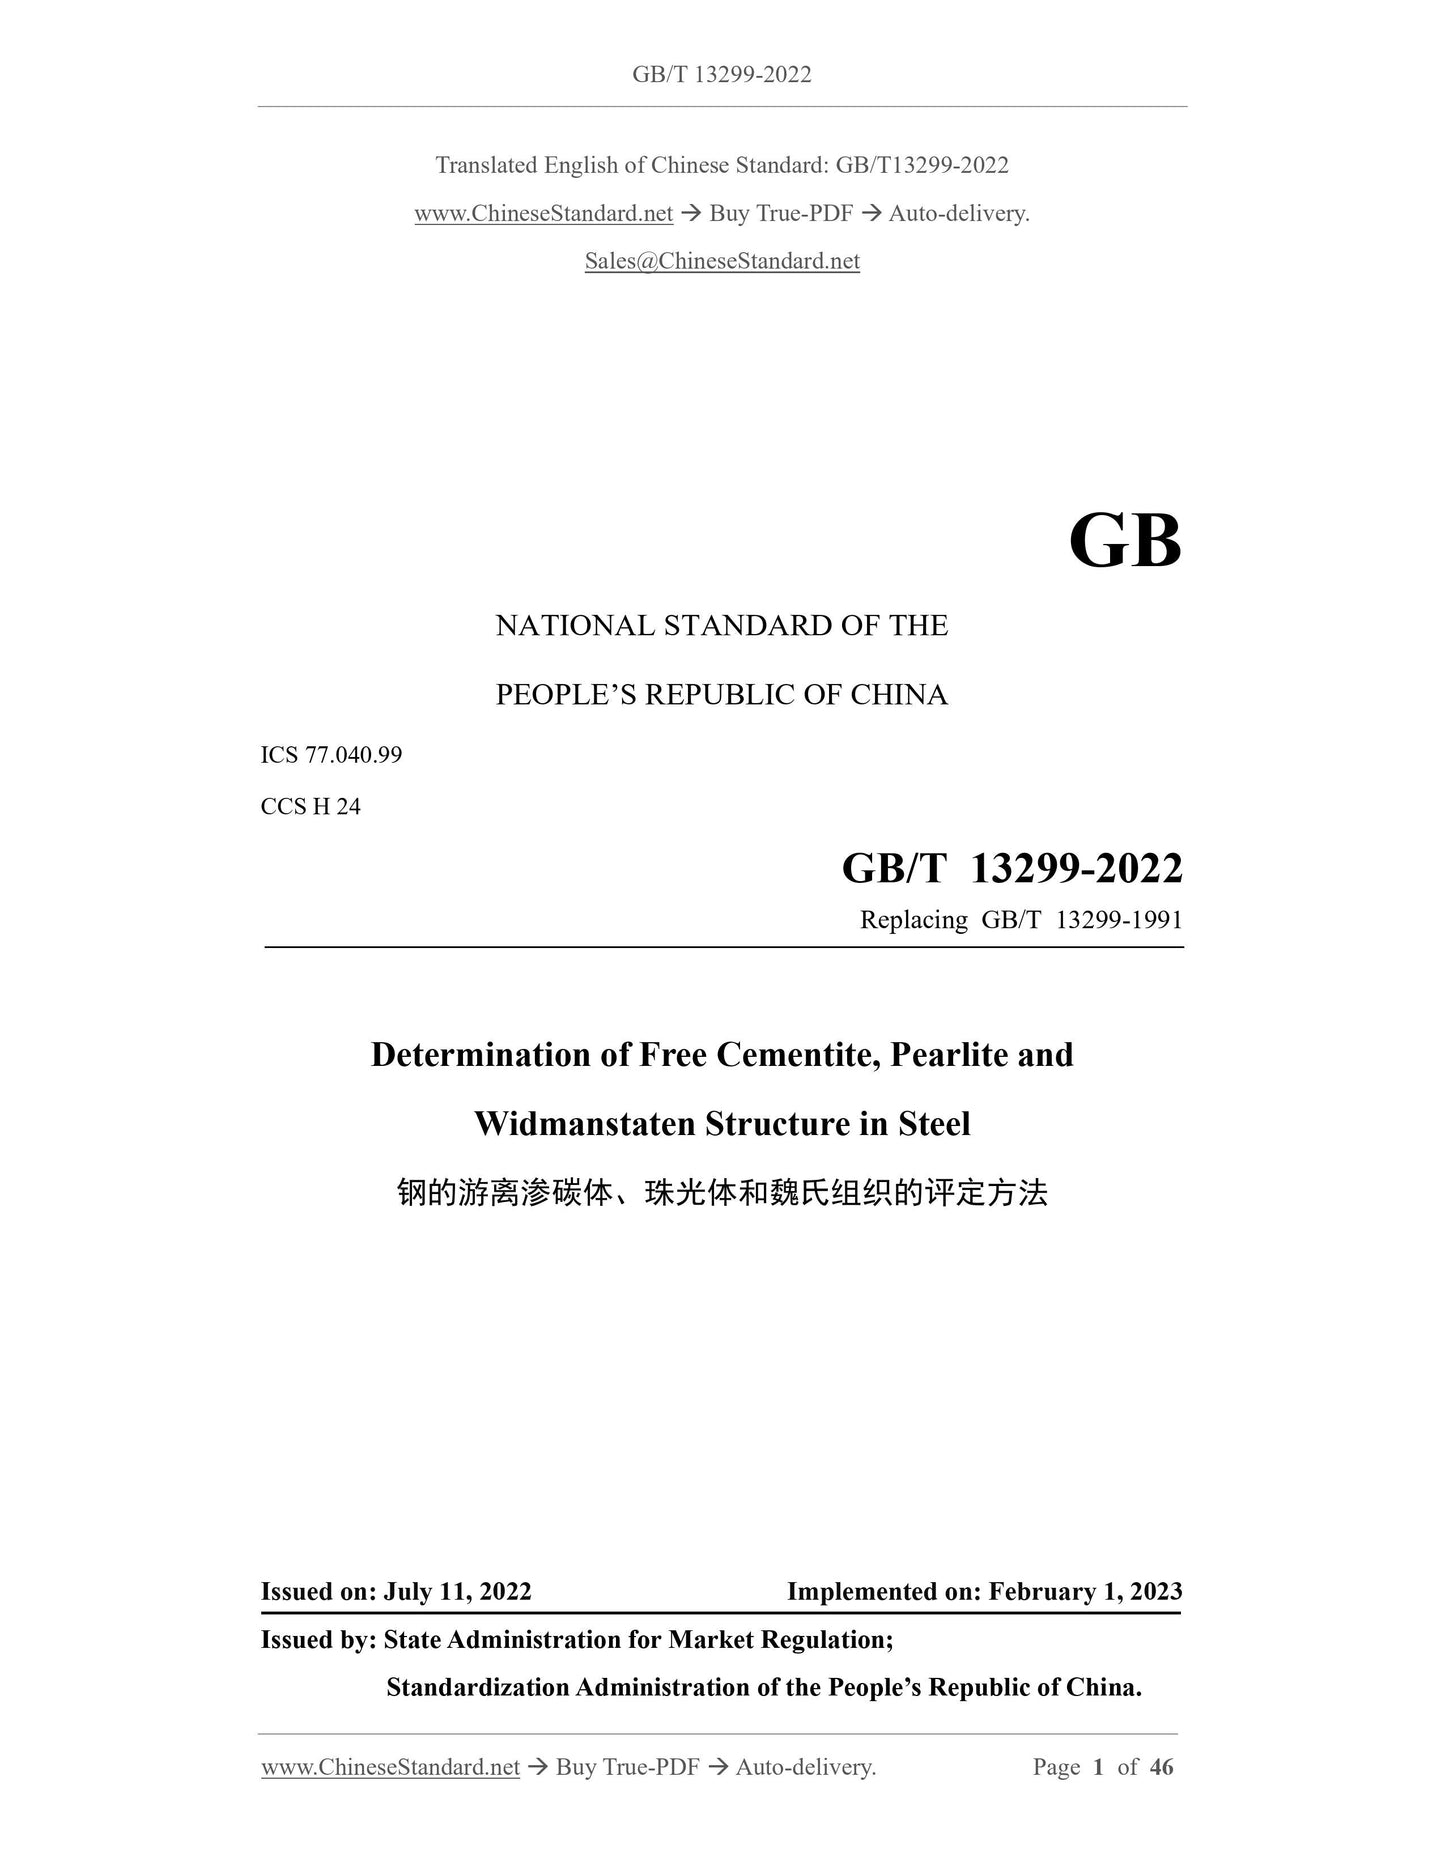 GB/T 13299-2022 Page 1